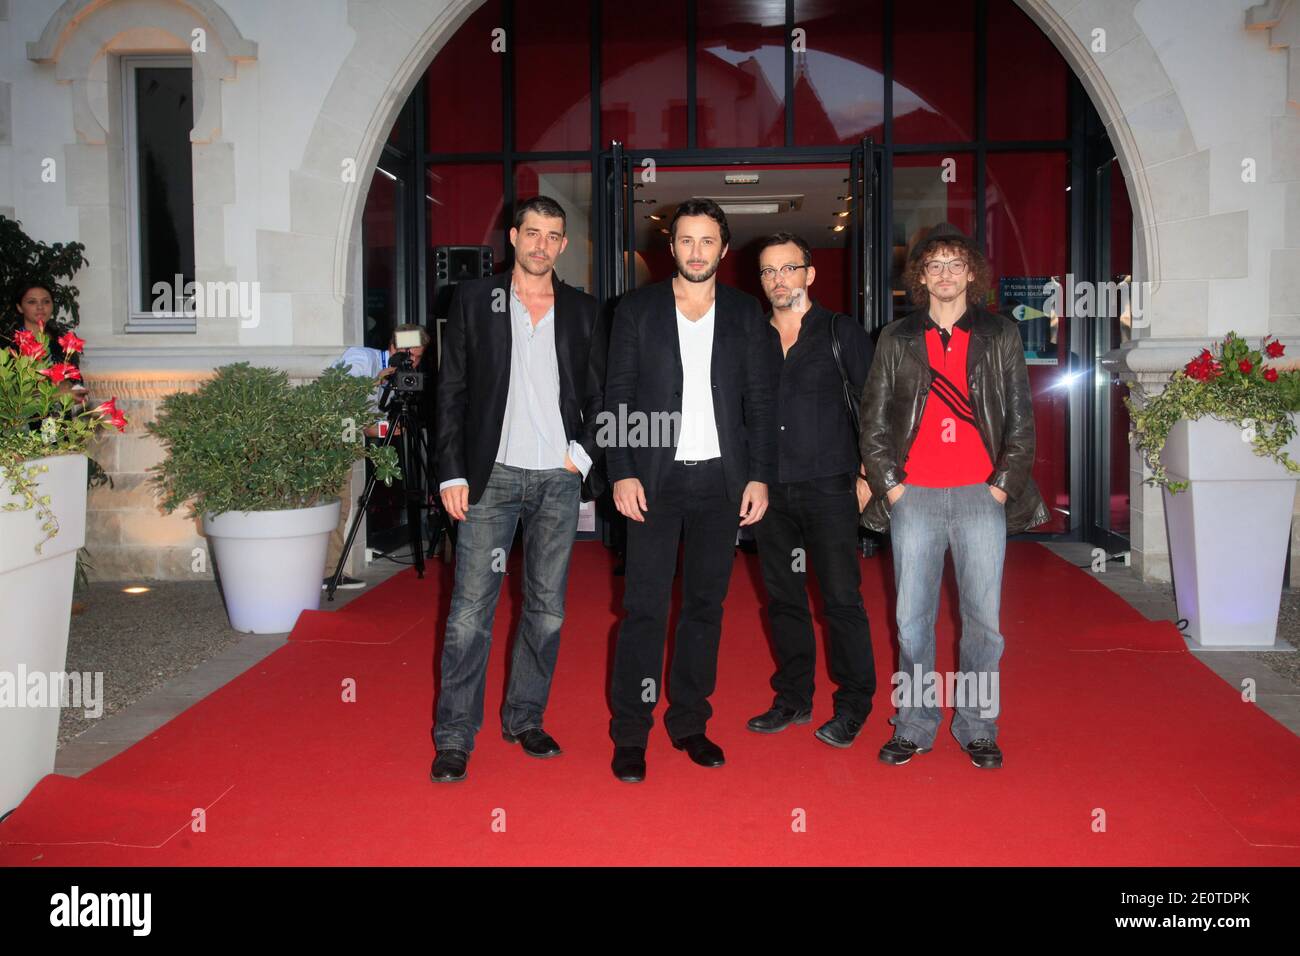 Jury members (L-R) Thierry Neuvic,Michael Cohen, Cyril Mennegun and Julien Courbey pose for photographers at the opening of the 17th Saint-Jean-de-Luz Young Directors International Film Festival, in Saint-Jean-de-Luz, France on October 9, 2012. Photo by Jerome Domine/ABACAPRESS.COM Stock Photo